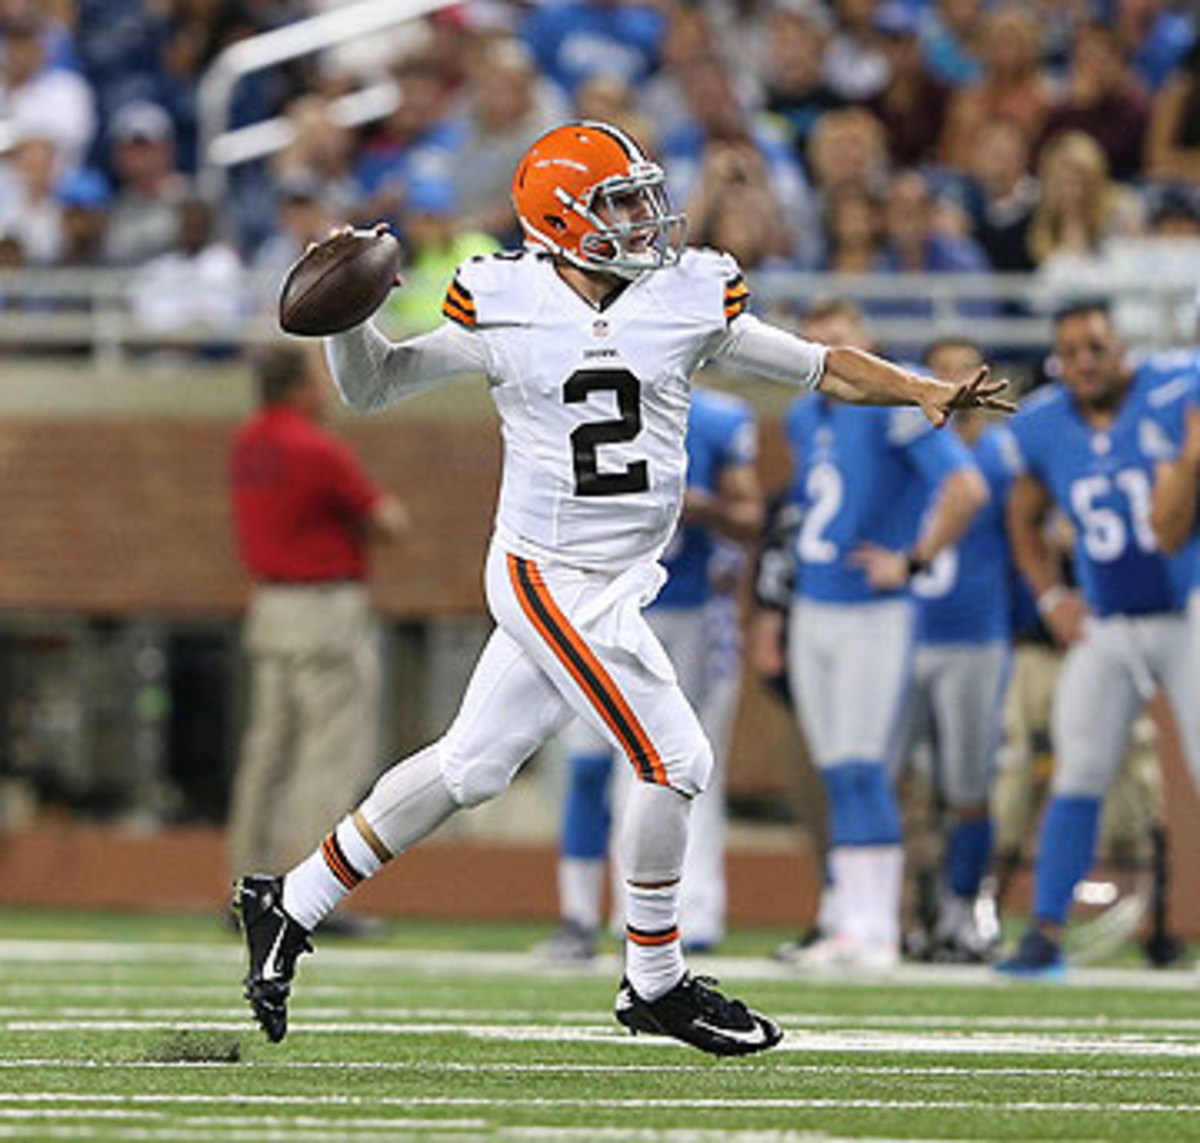 Johnny Manziel accounted for 91 yards of total offense on Saturday night. (Leon Halip/Getty Images)